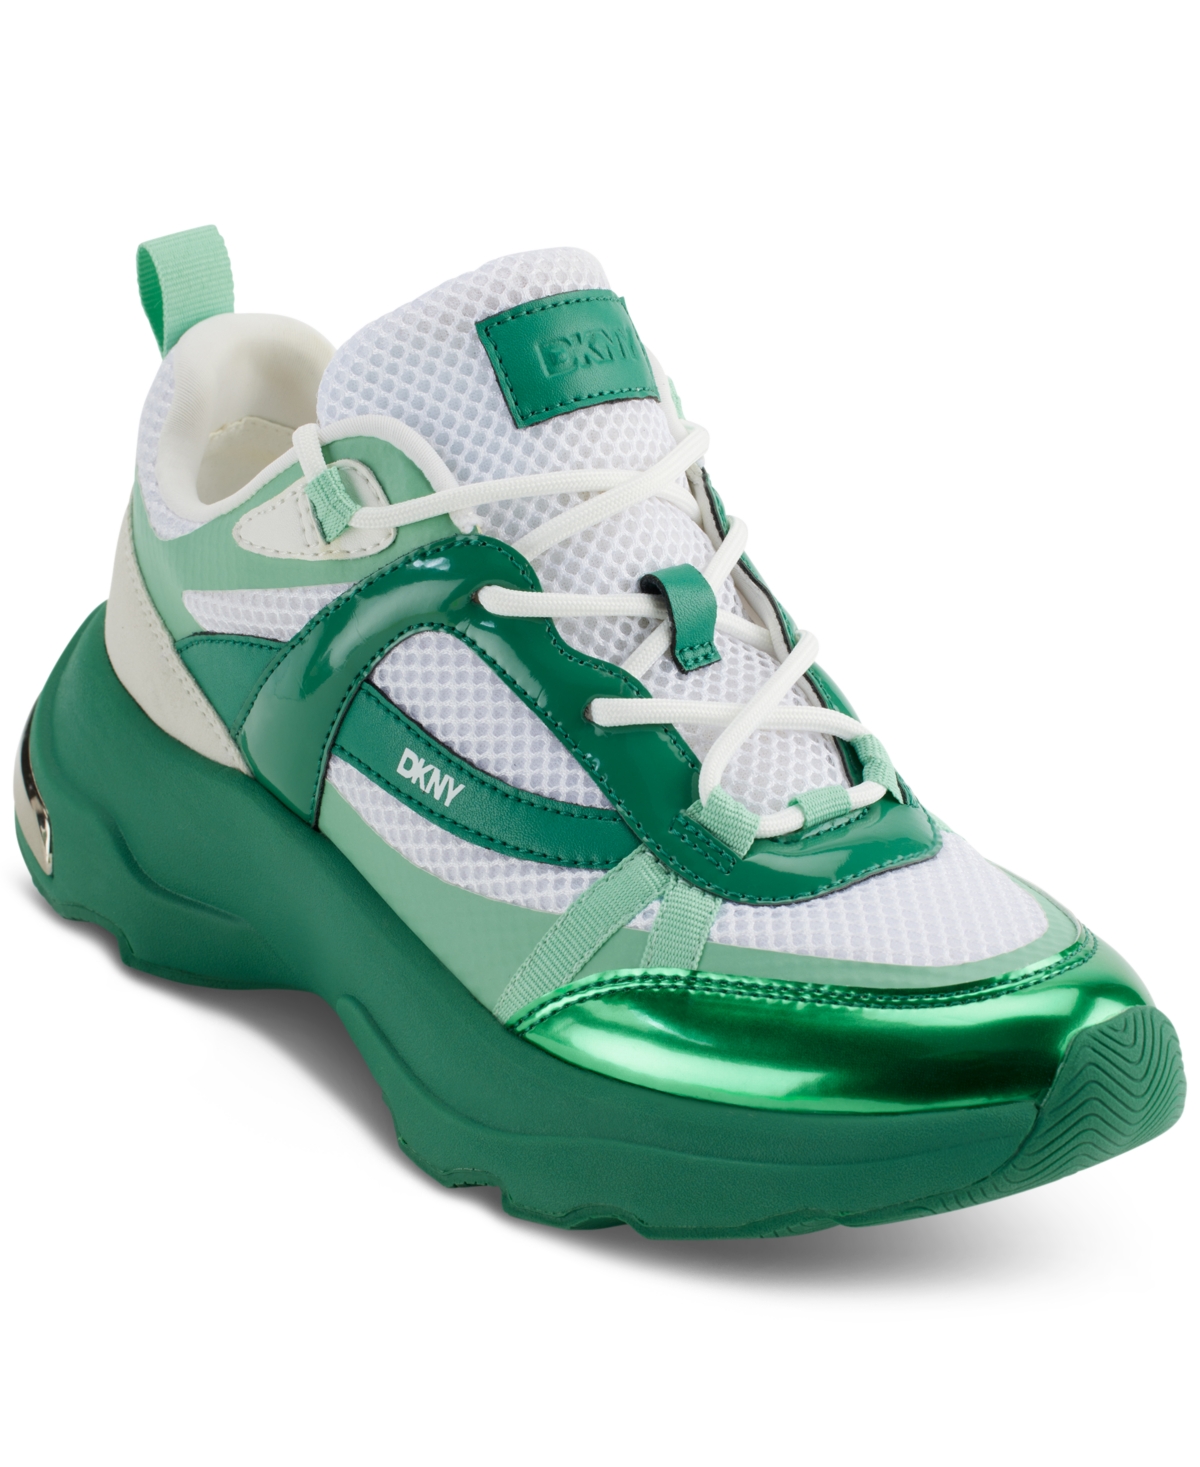 Shop Dkny Women's Juna Lace-up Running Sneakers In Bright White,green